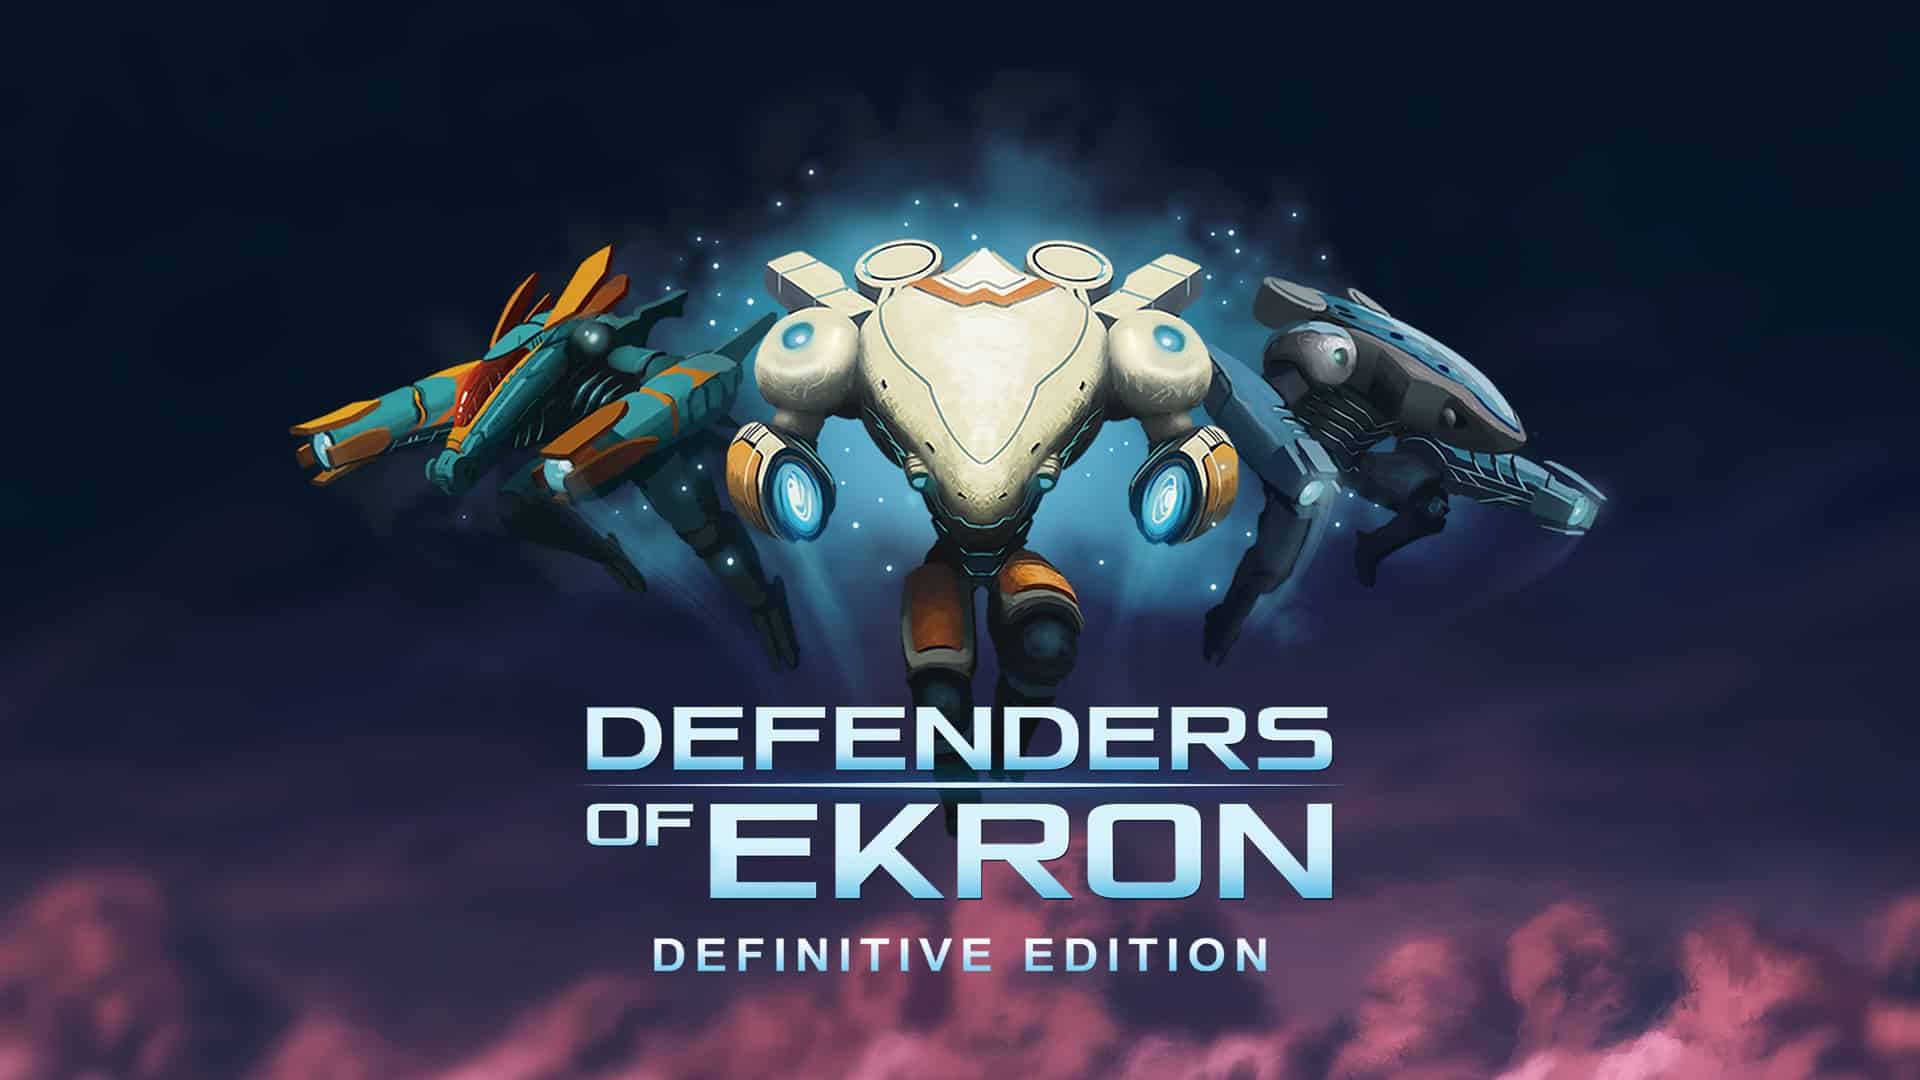 Defenders of Ekron player count stats